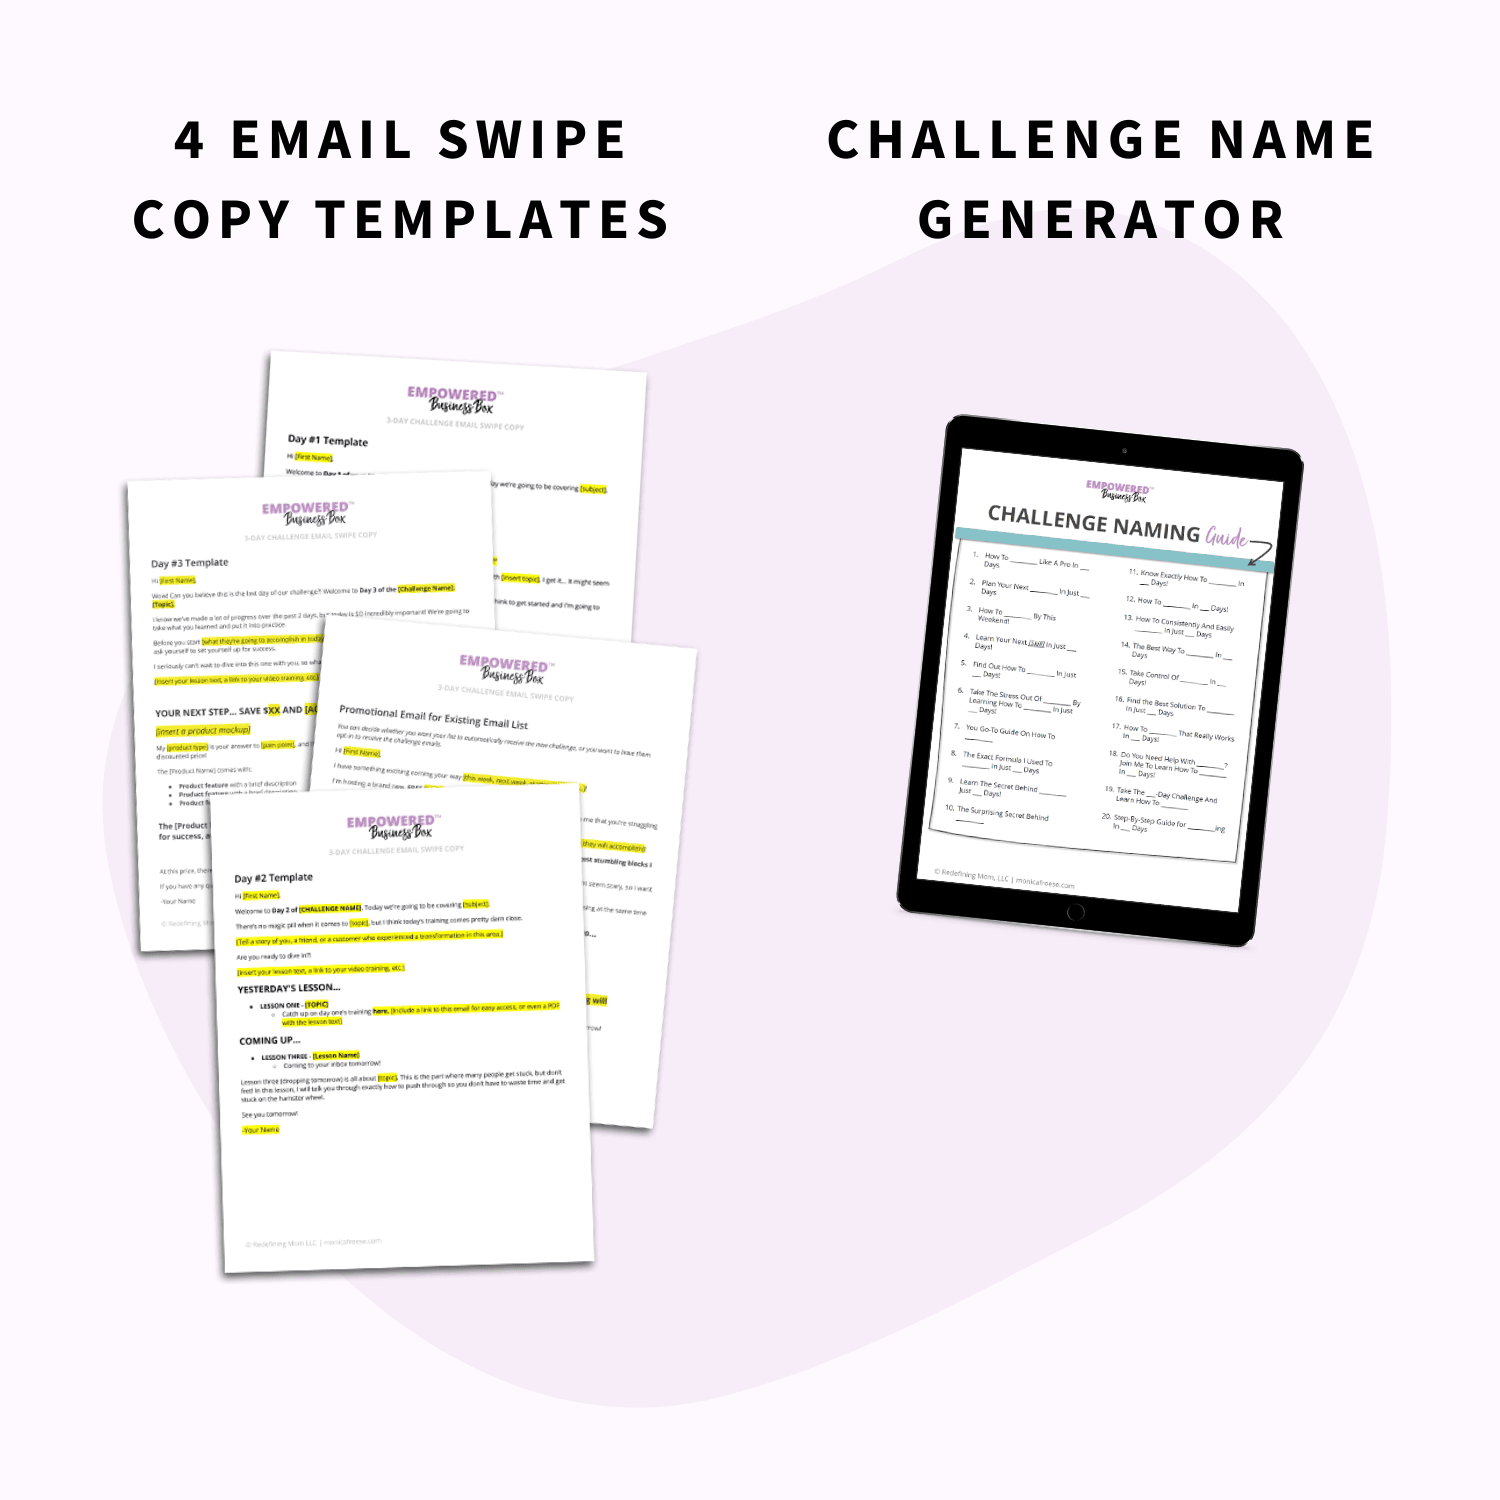 Grow your email list with a free challenge toolbox - 4 email swipe copy templates and a challenge name generator